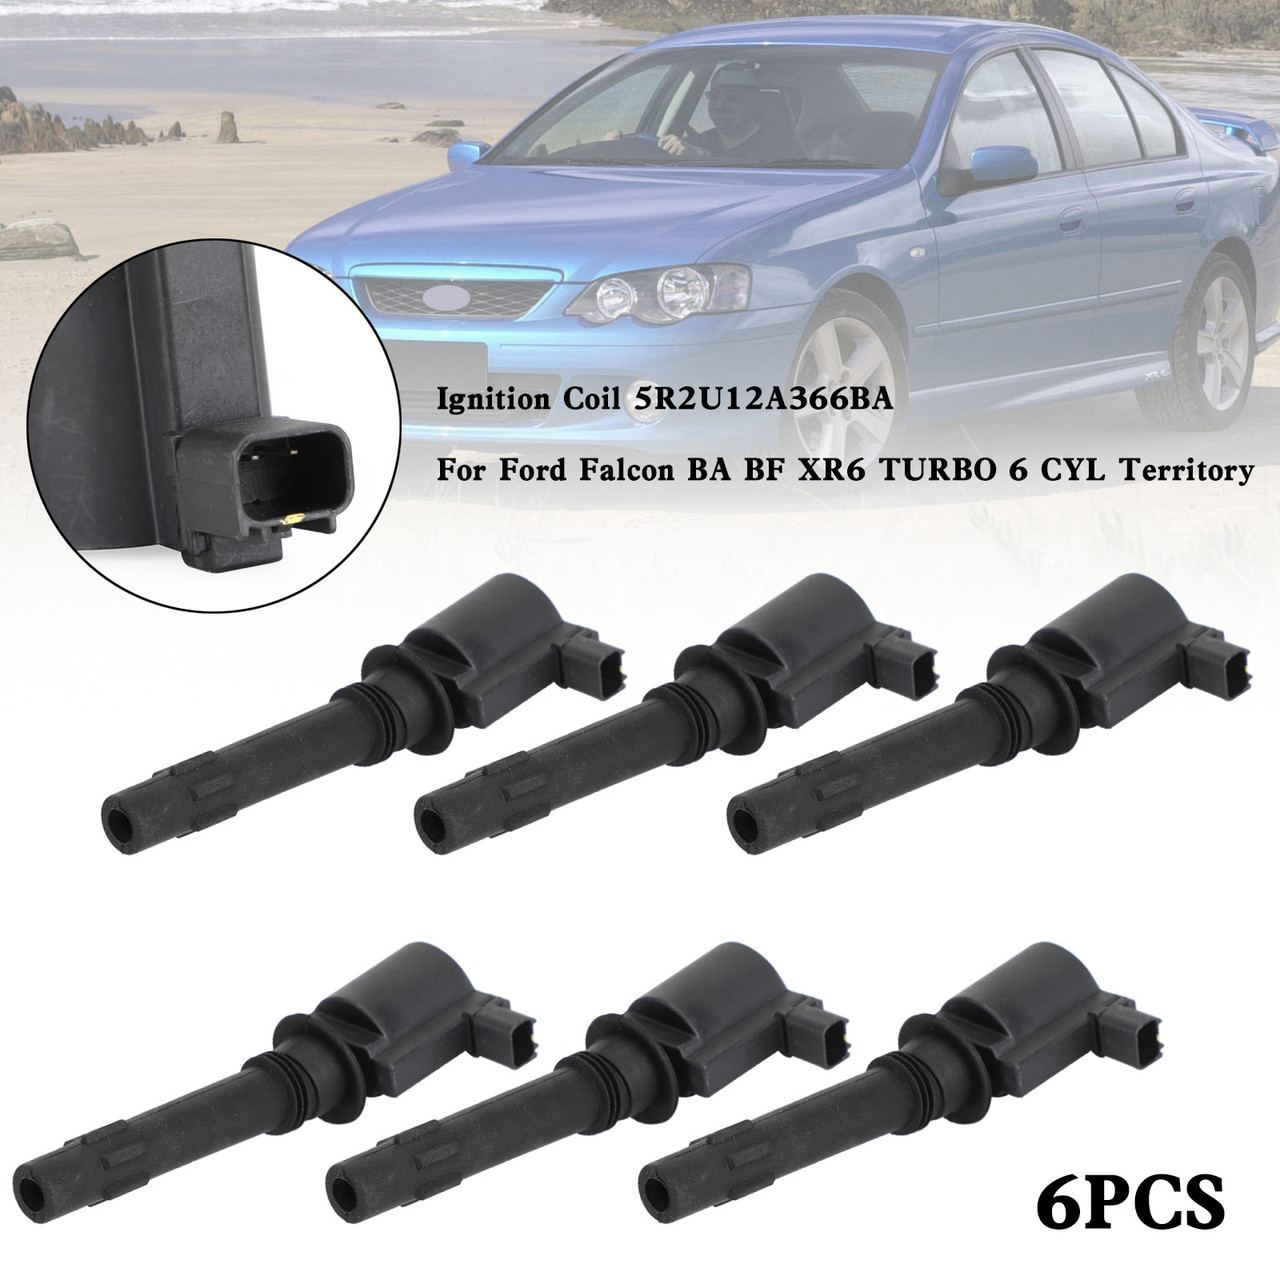 6x Ignition Coil 5R2U12A366BA For Ford Falcon BA BF XR6 TURBO 6 CYL Territory